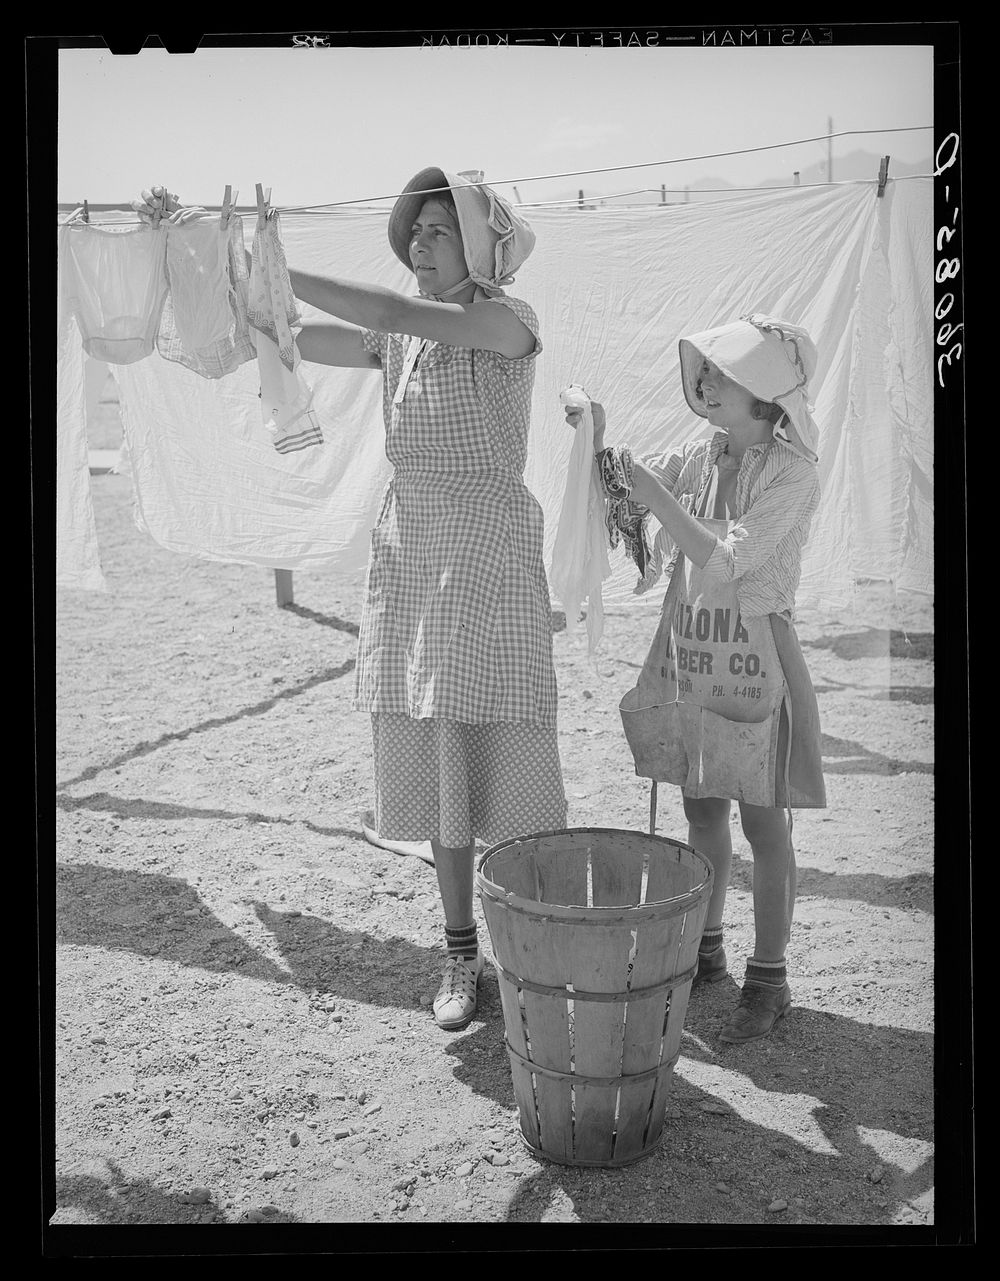 Wife of migratory agricultural laborer and daughter hanging up the wash at the Agua Fria migratory labor camp. Arizona by…